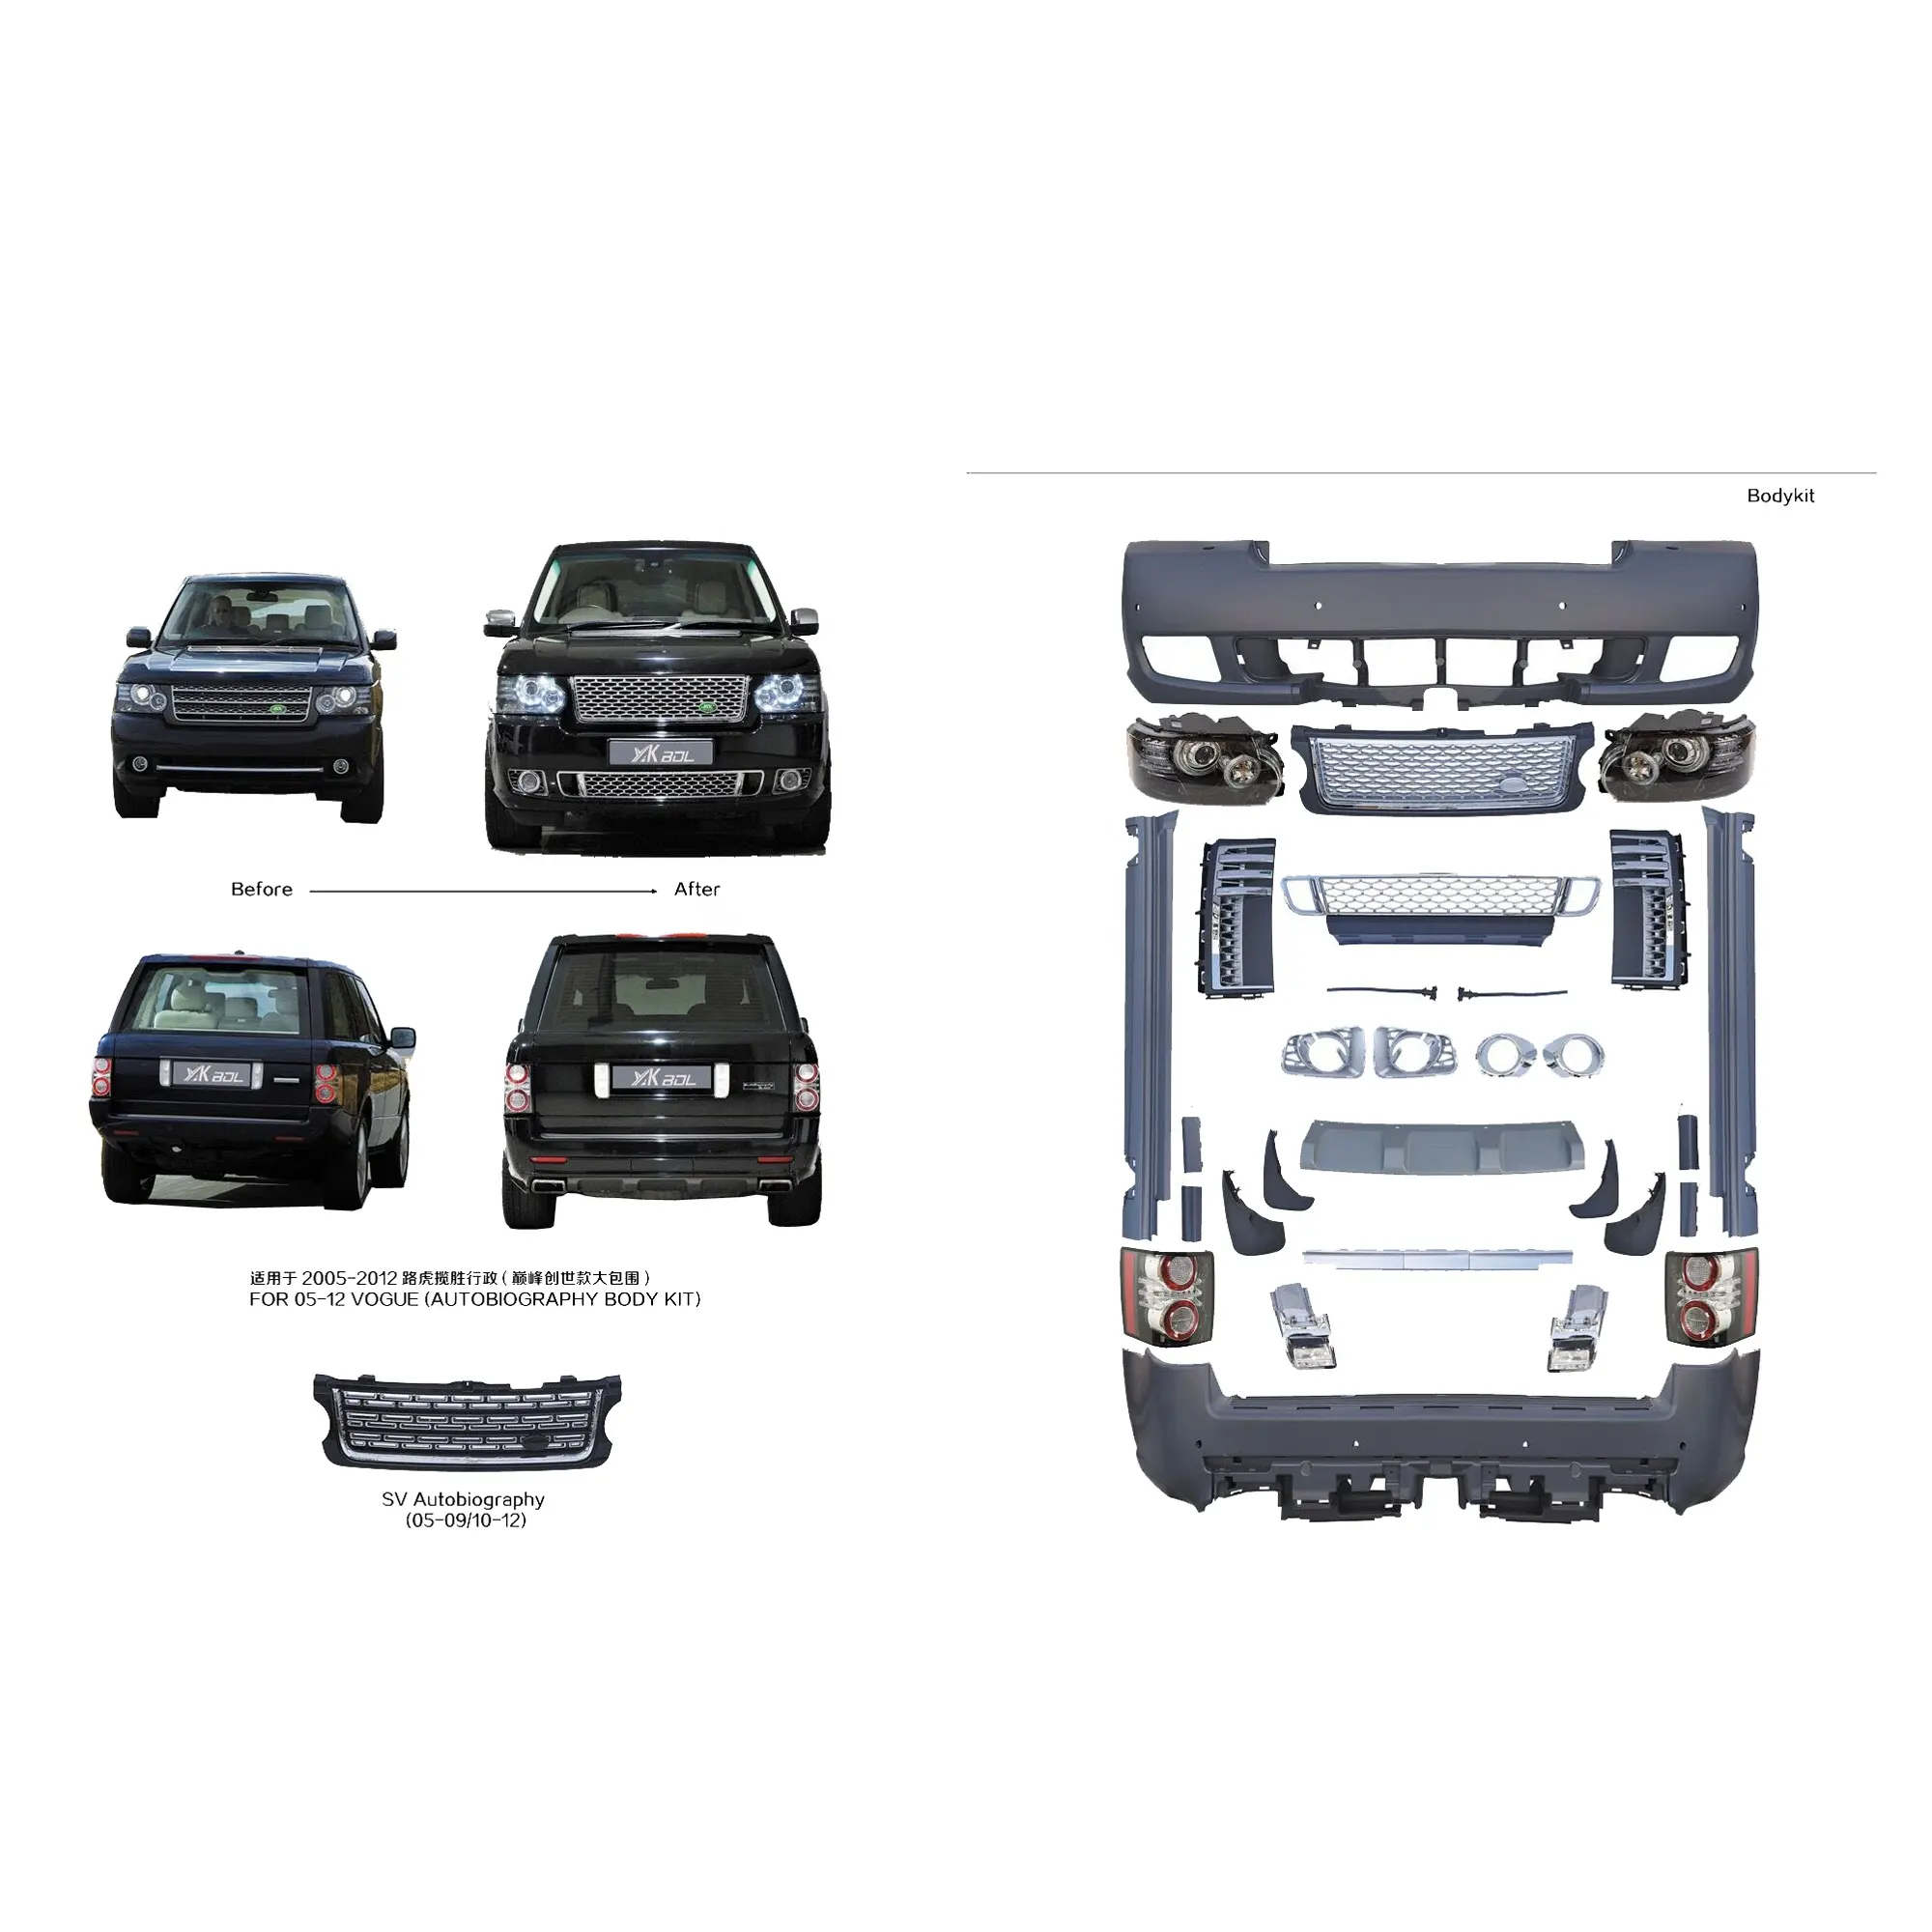 L322 Biography for Range Rover Vogue Body Kits 2012 Upgrade SVO Style